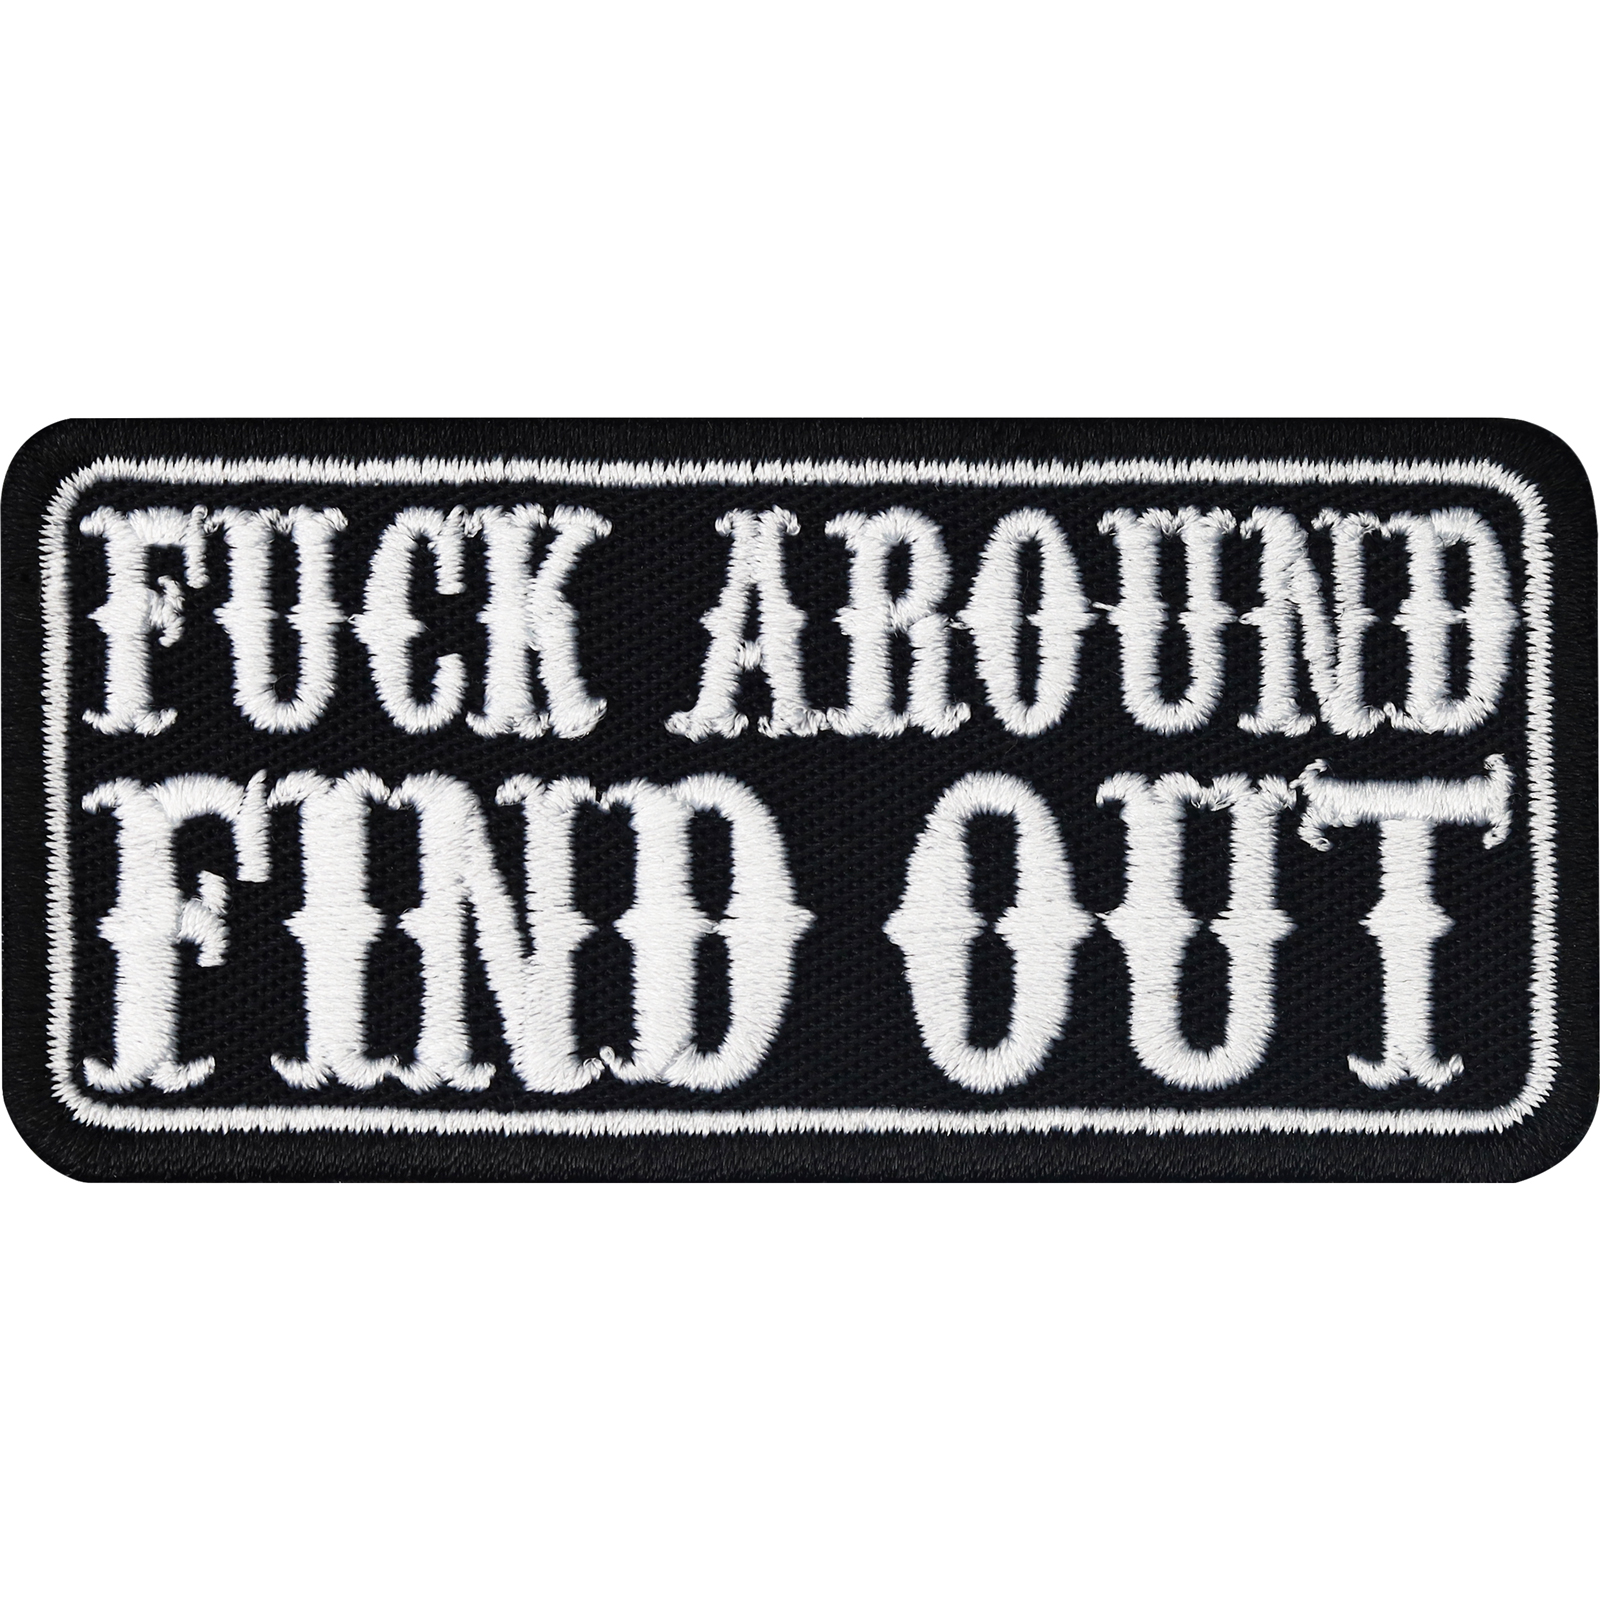 Fuck around find out - Patch